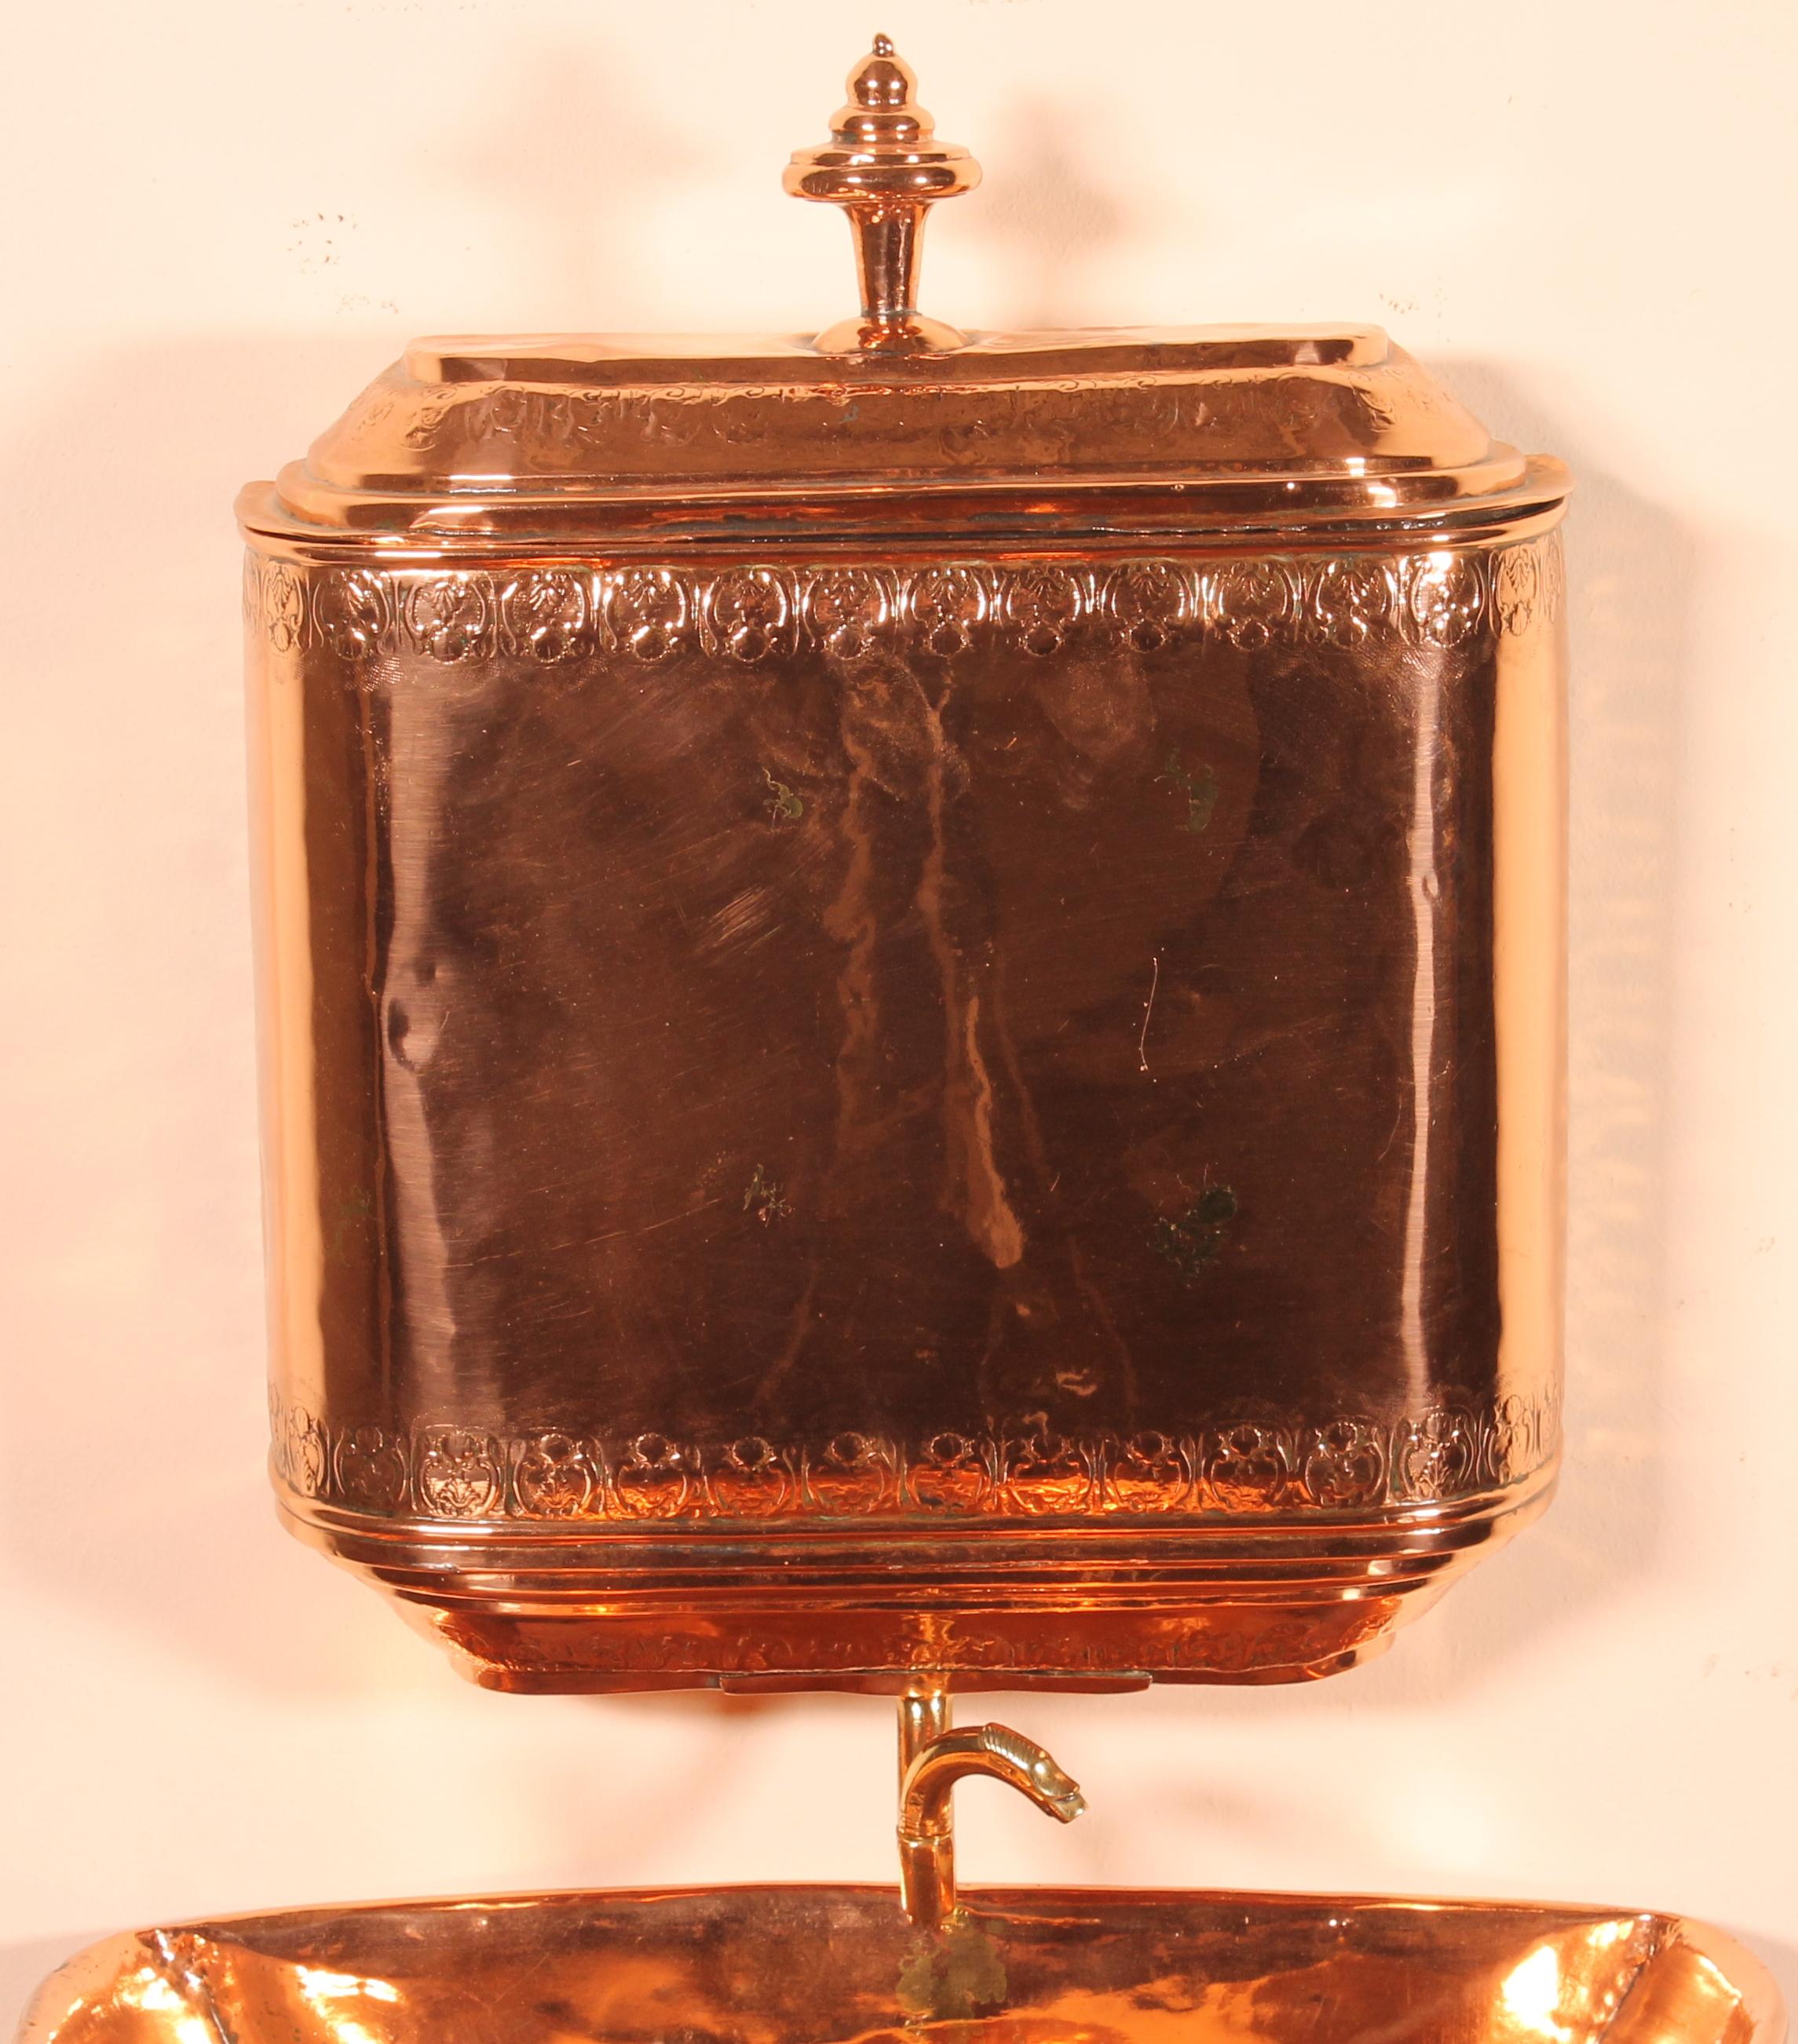 Superb fountain and its 18th century copper basin.
The fountain is in perfect condition and has its top.
It has been repolished and has a superb patina.

